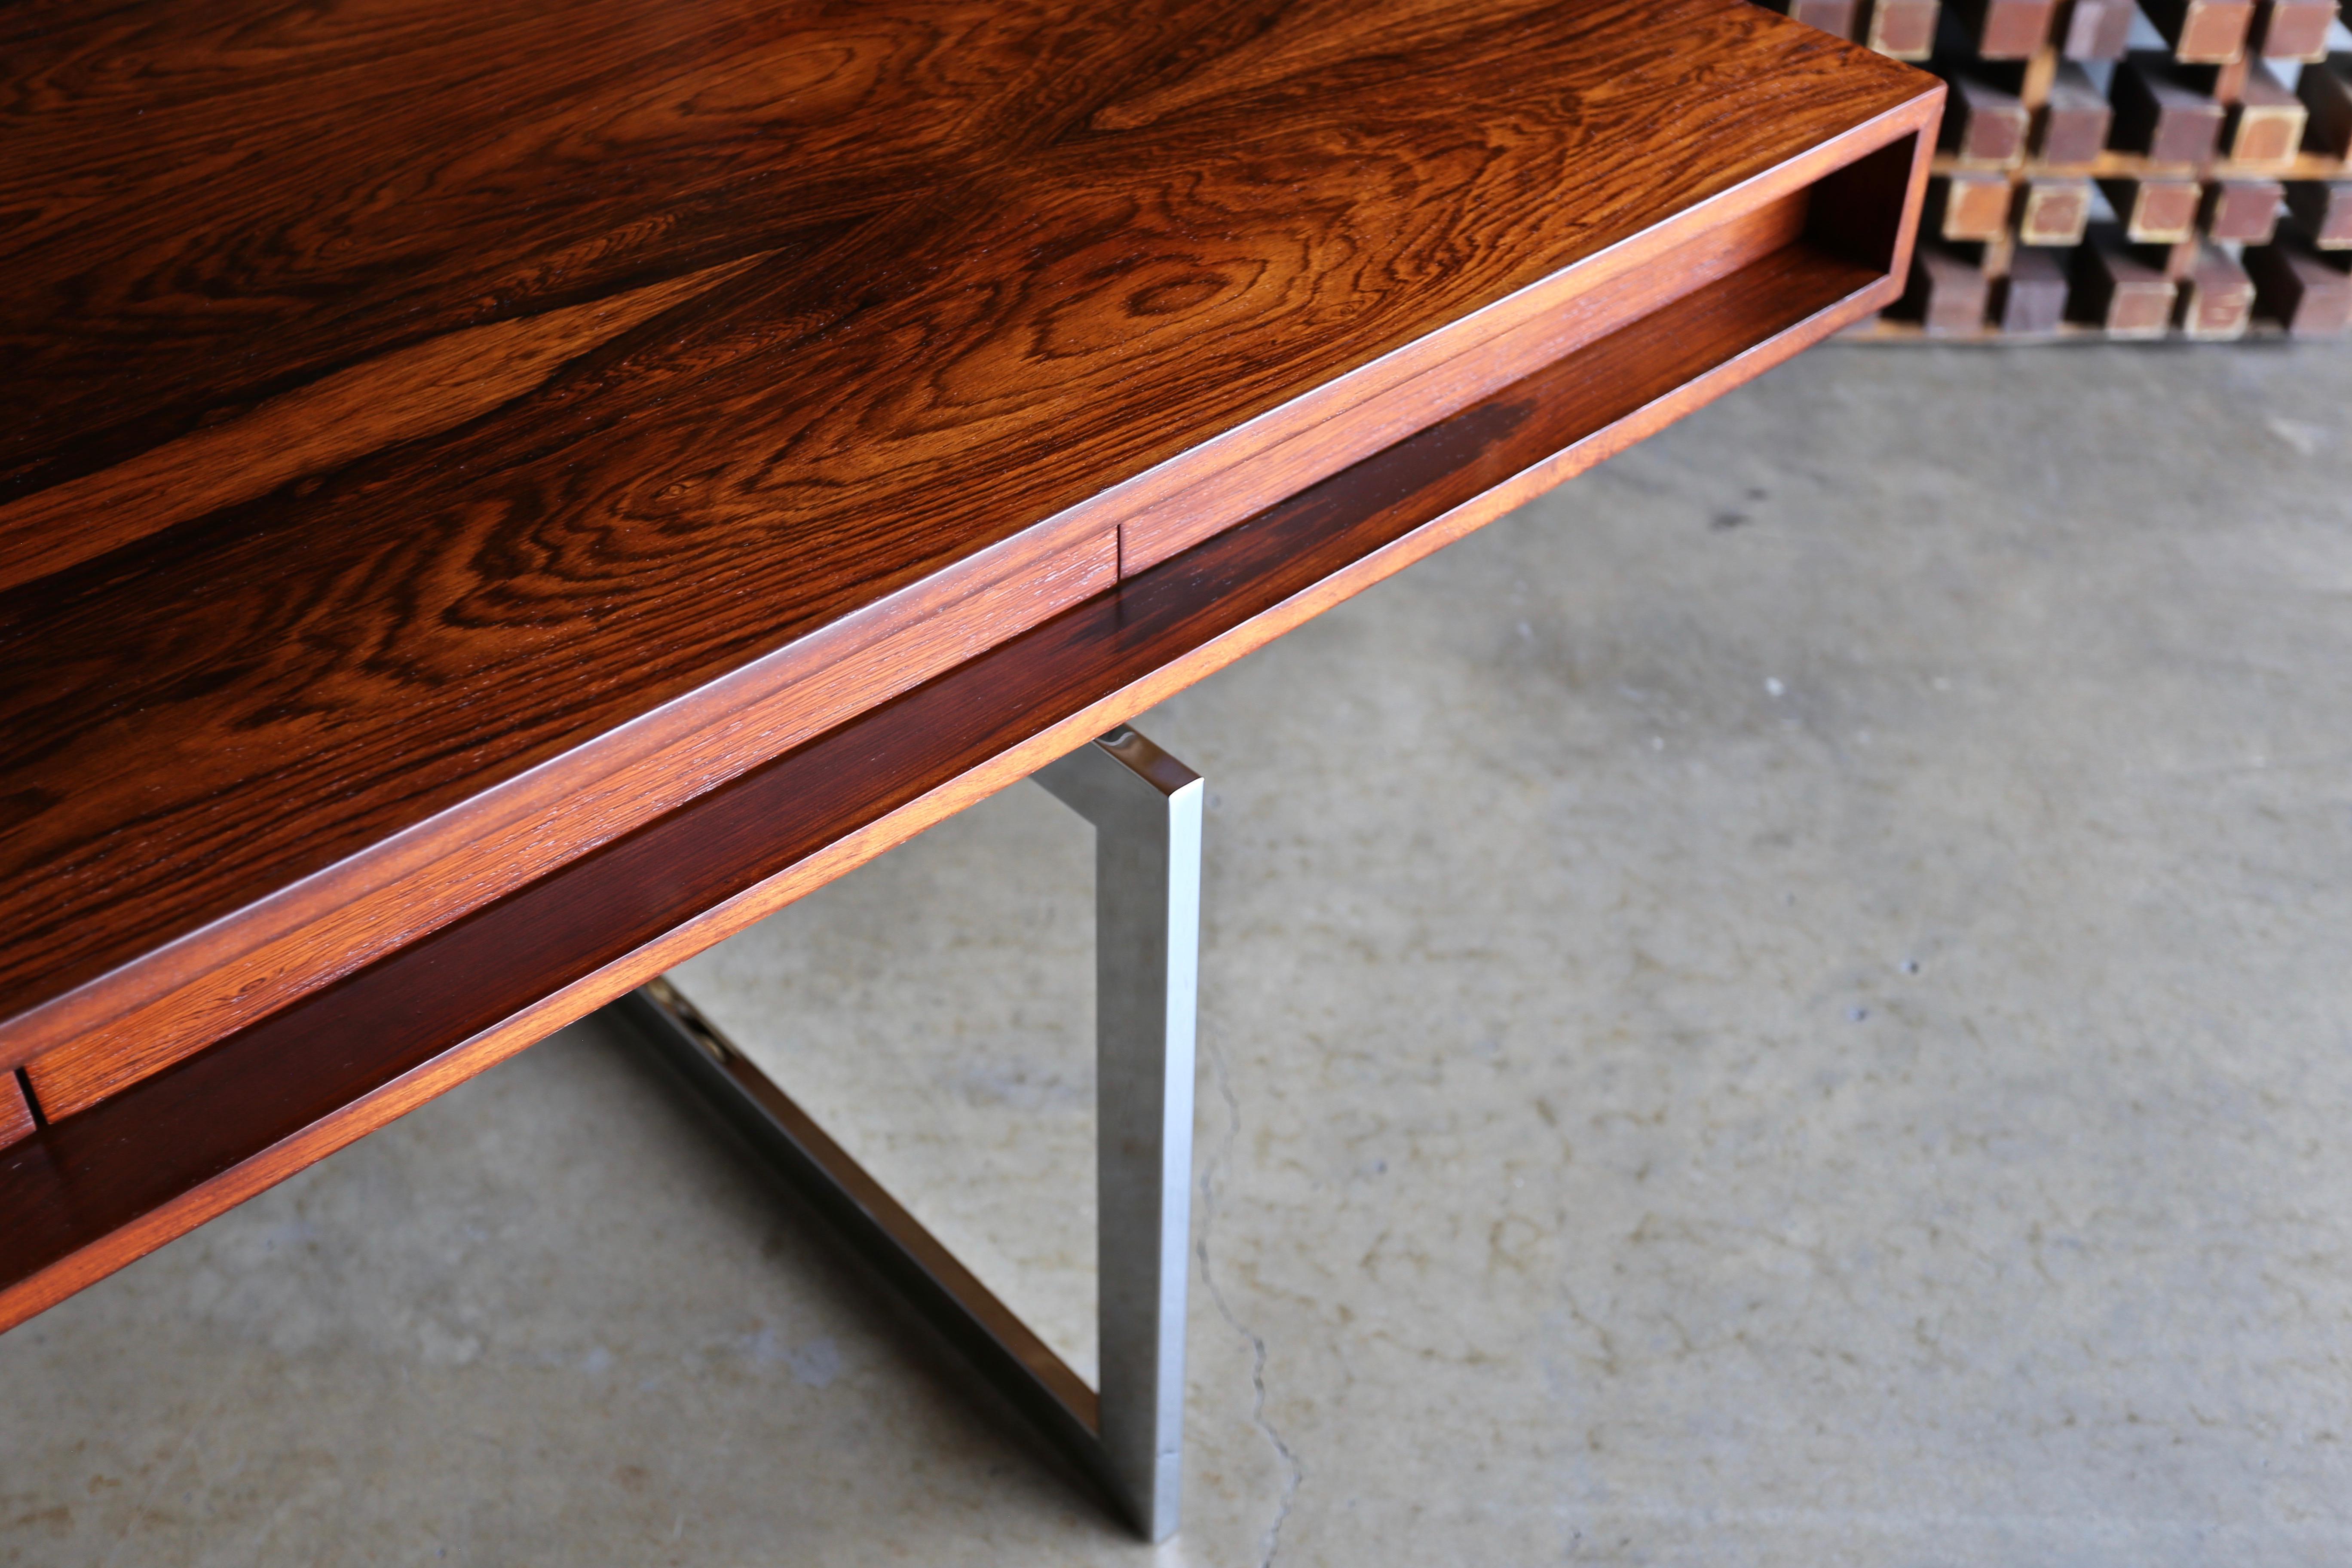 20th Century Bodil Kjaer Rosewood Desk for E. Pederson and Sons A/S, circa 1959